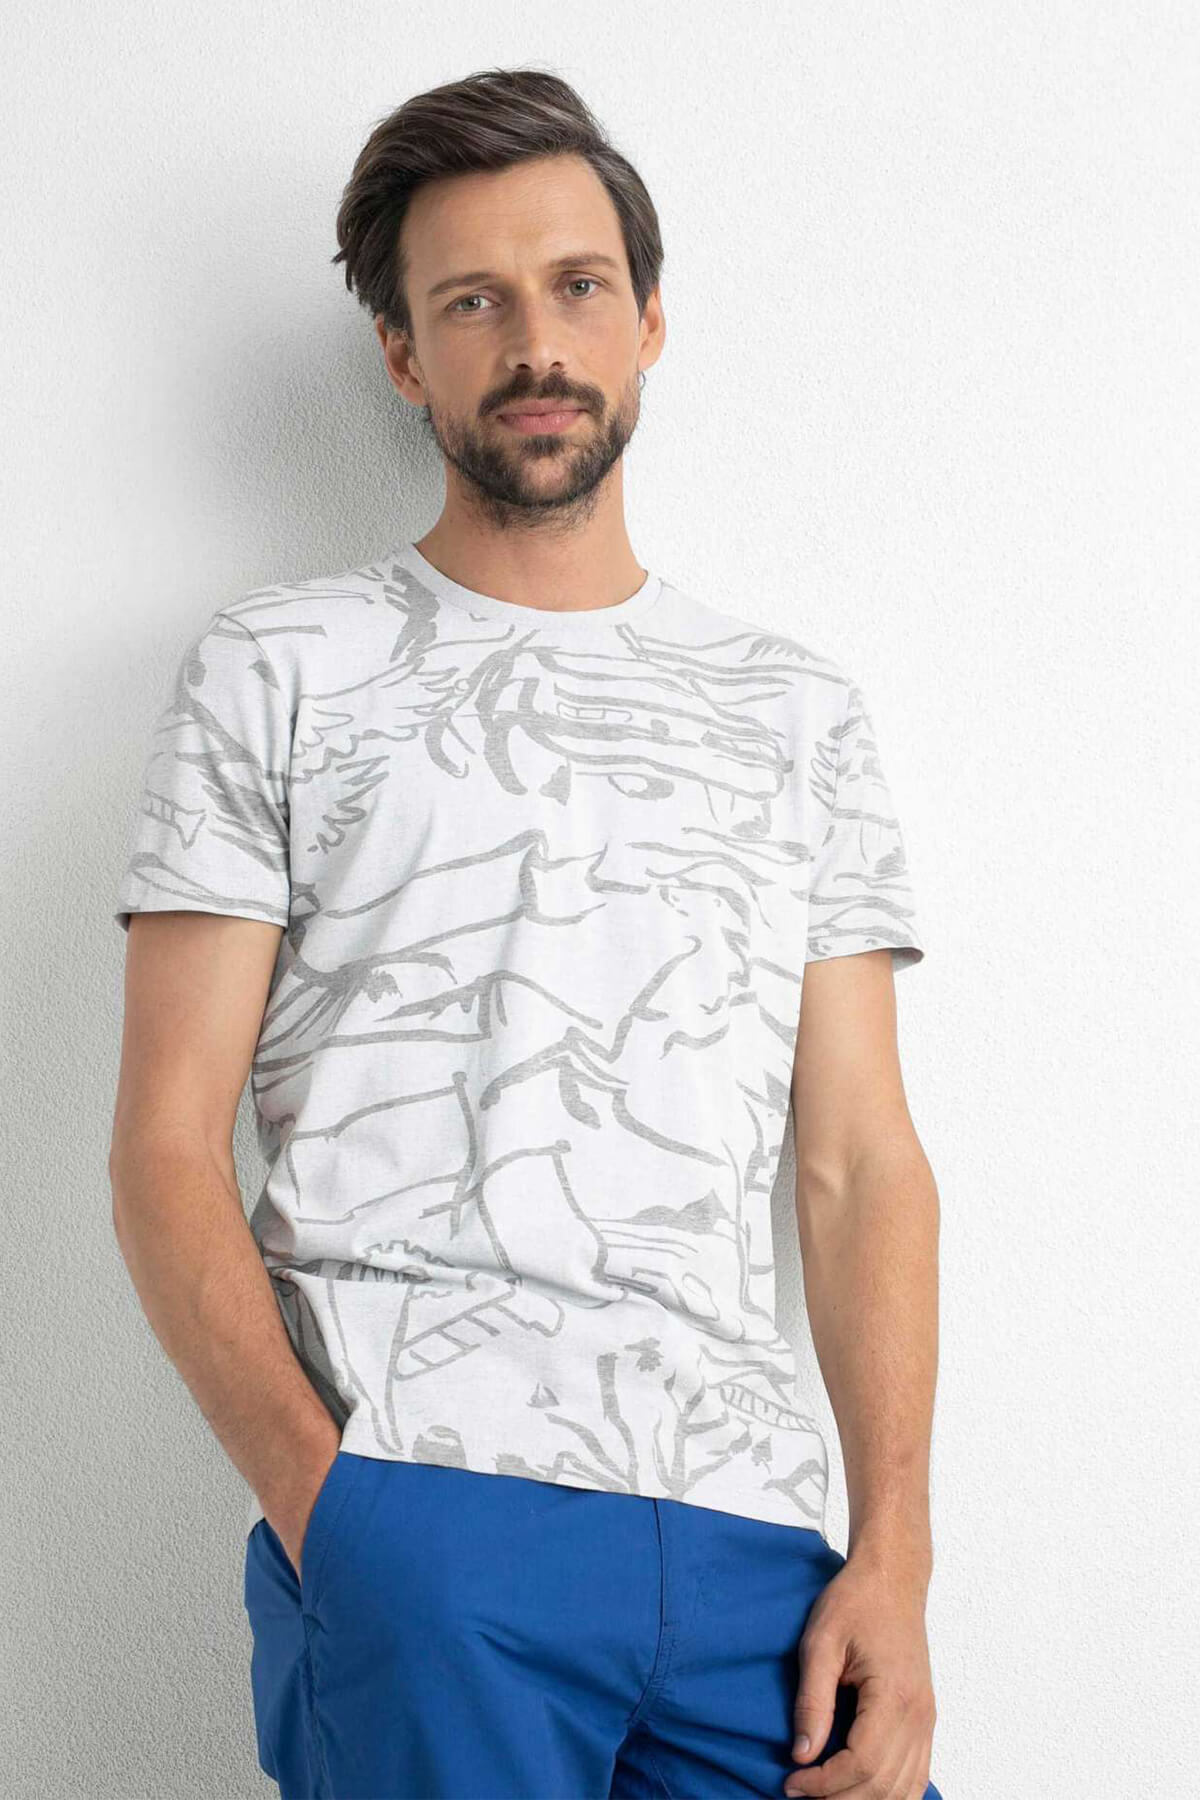 Petrol Industries T-shirt With All Over Print